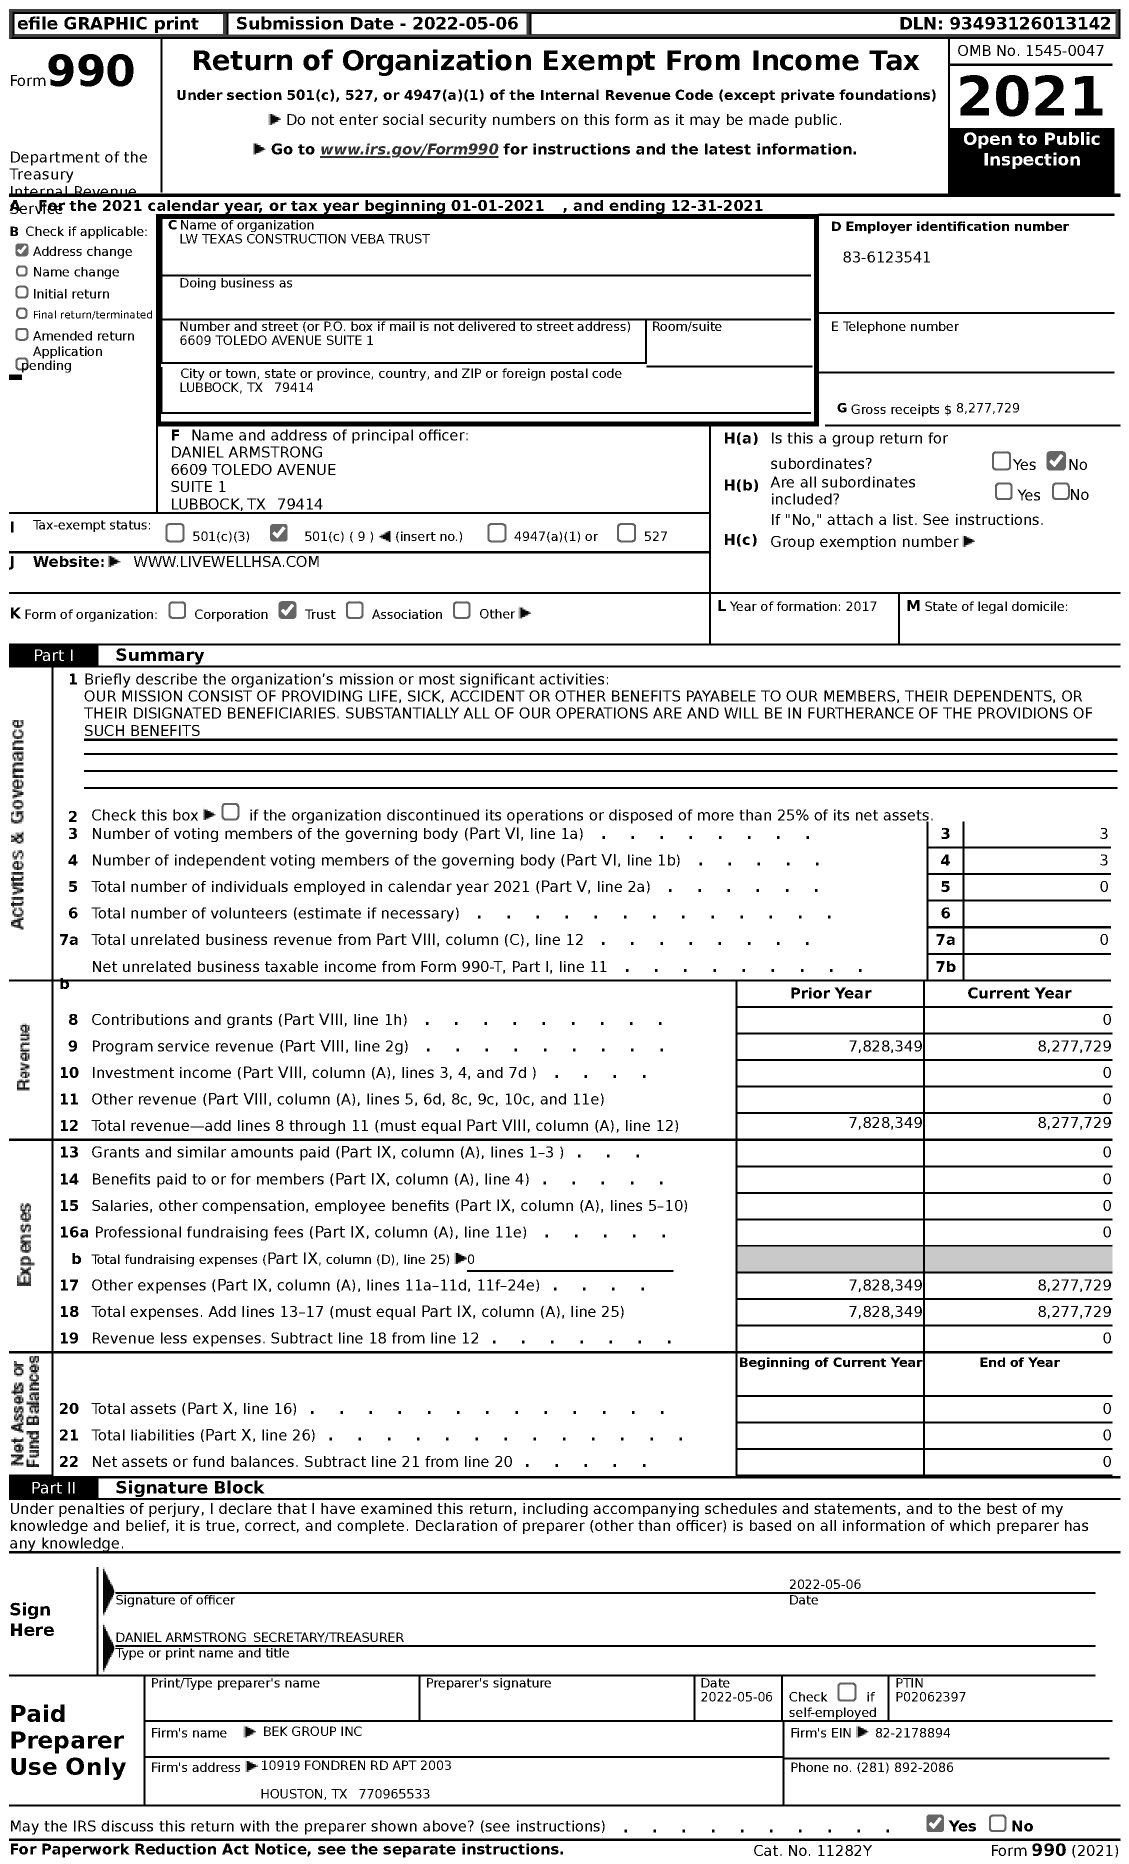 Image of first page of 2021 Form 990 for LW Texas Construction Veba Trust